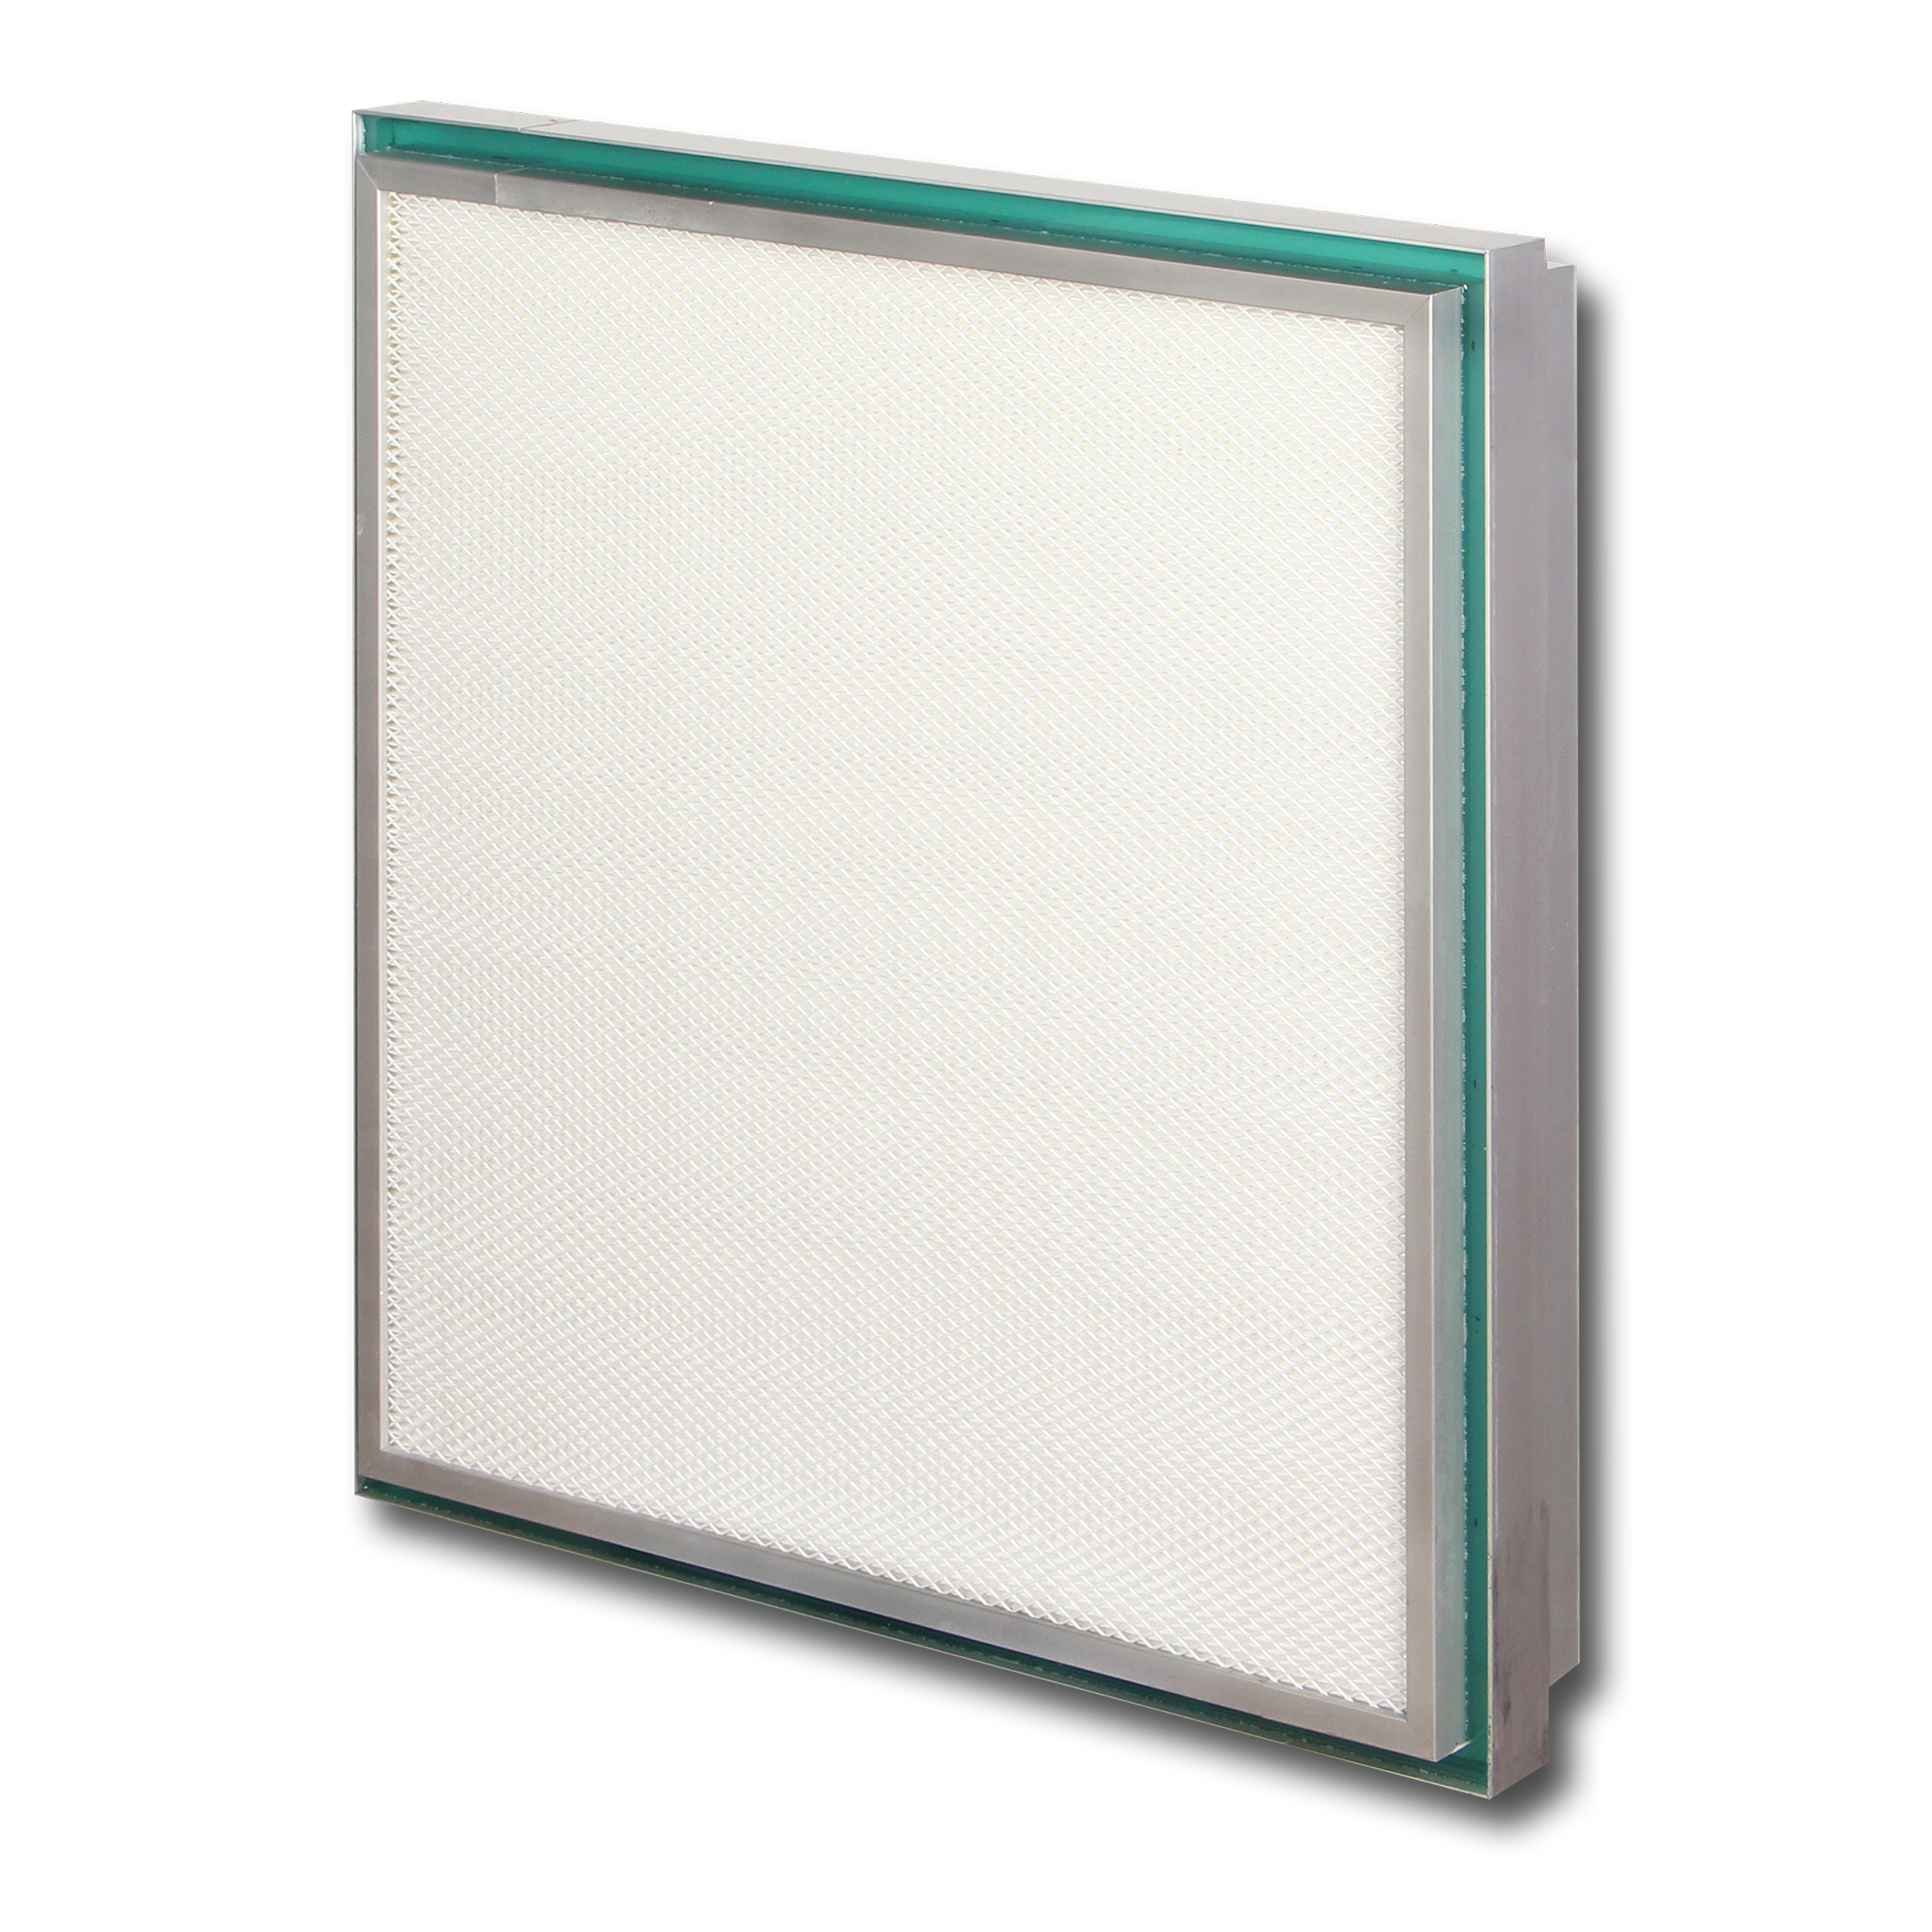 REVERSE GEL TYPE HEPA CEILING FILTER (RSR : ROOM SIDE REPLACEMENT)